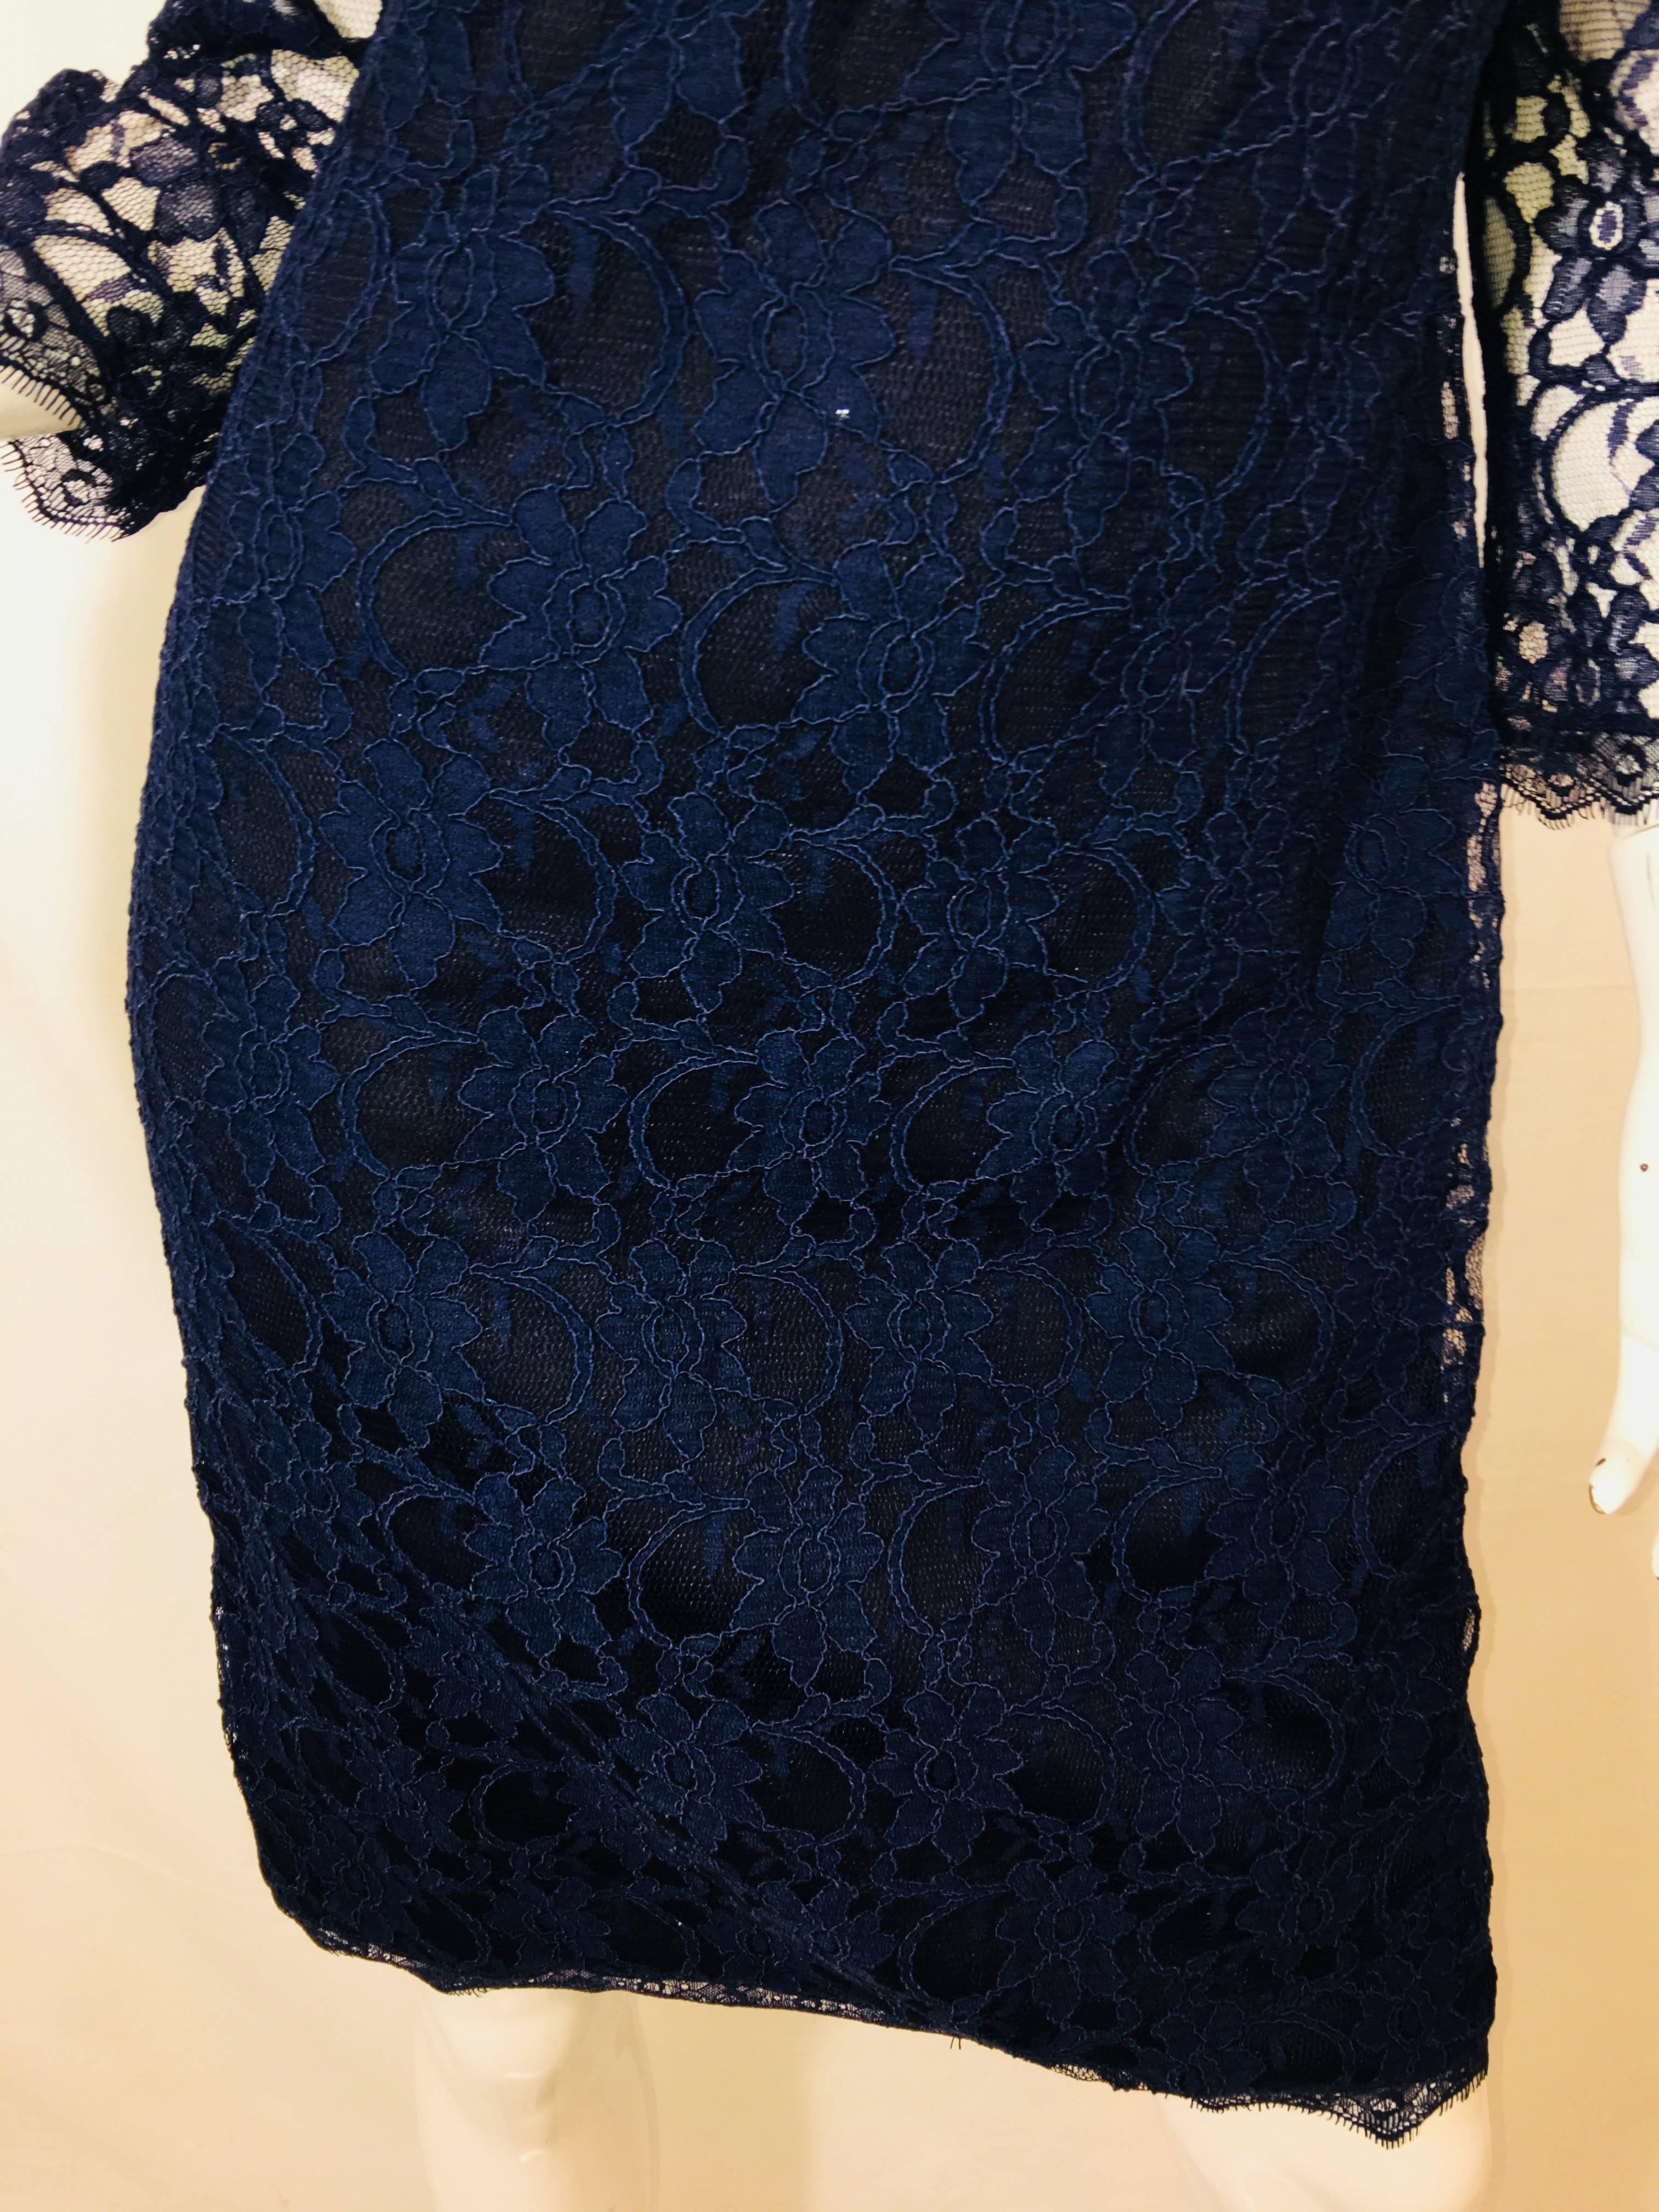 Joseph Ribkoff Lace Sheath Dress with 3/4 Sheer Sleeves and Zipper up the Back.